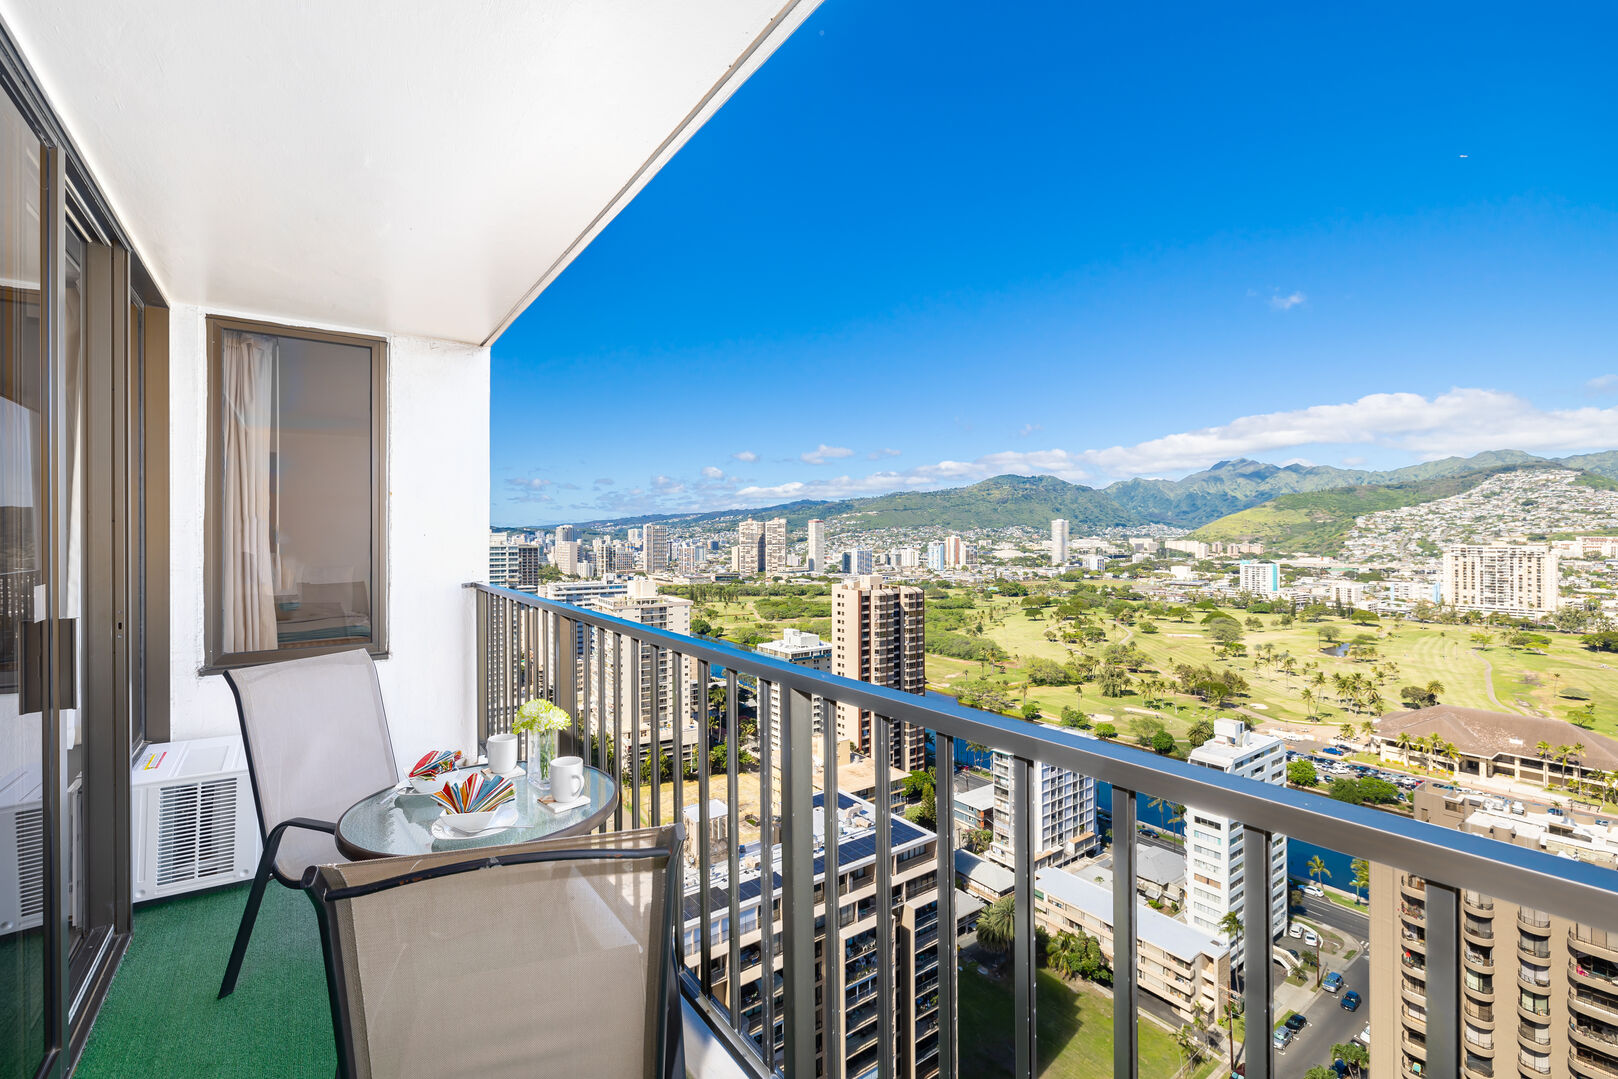 Enjoy the mountain views from your balcony!